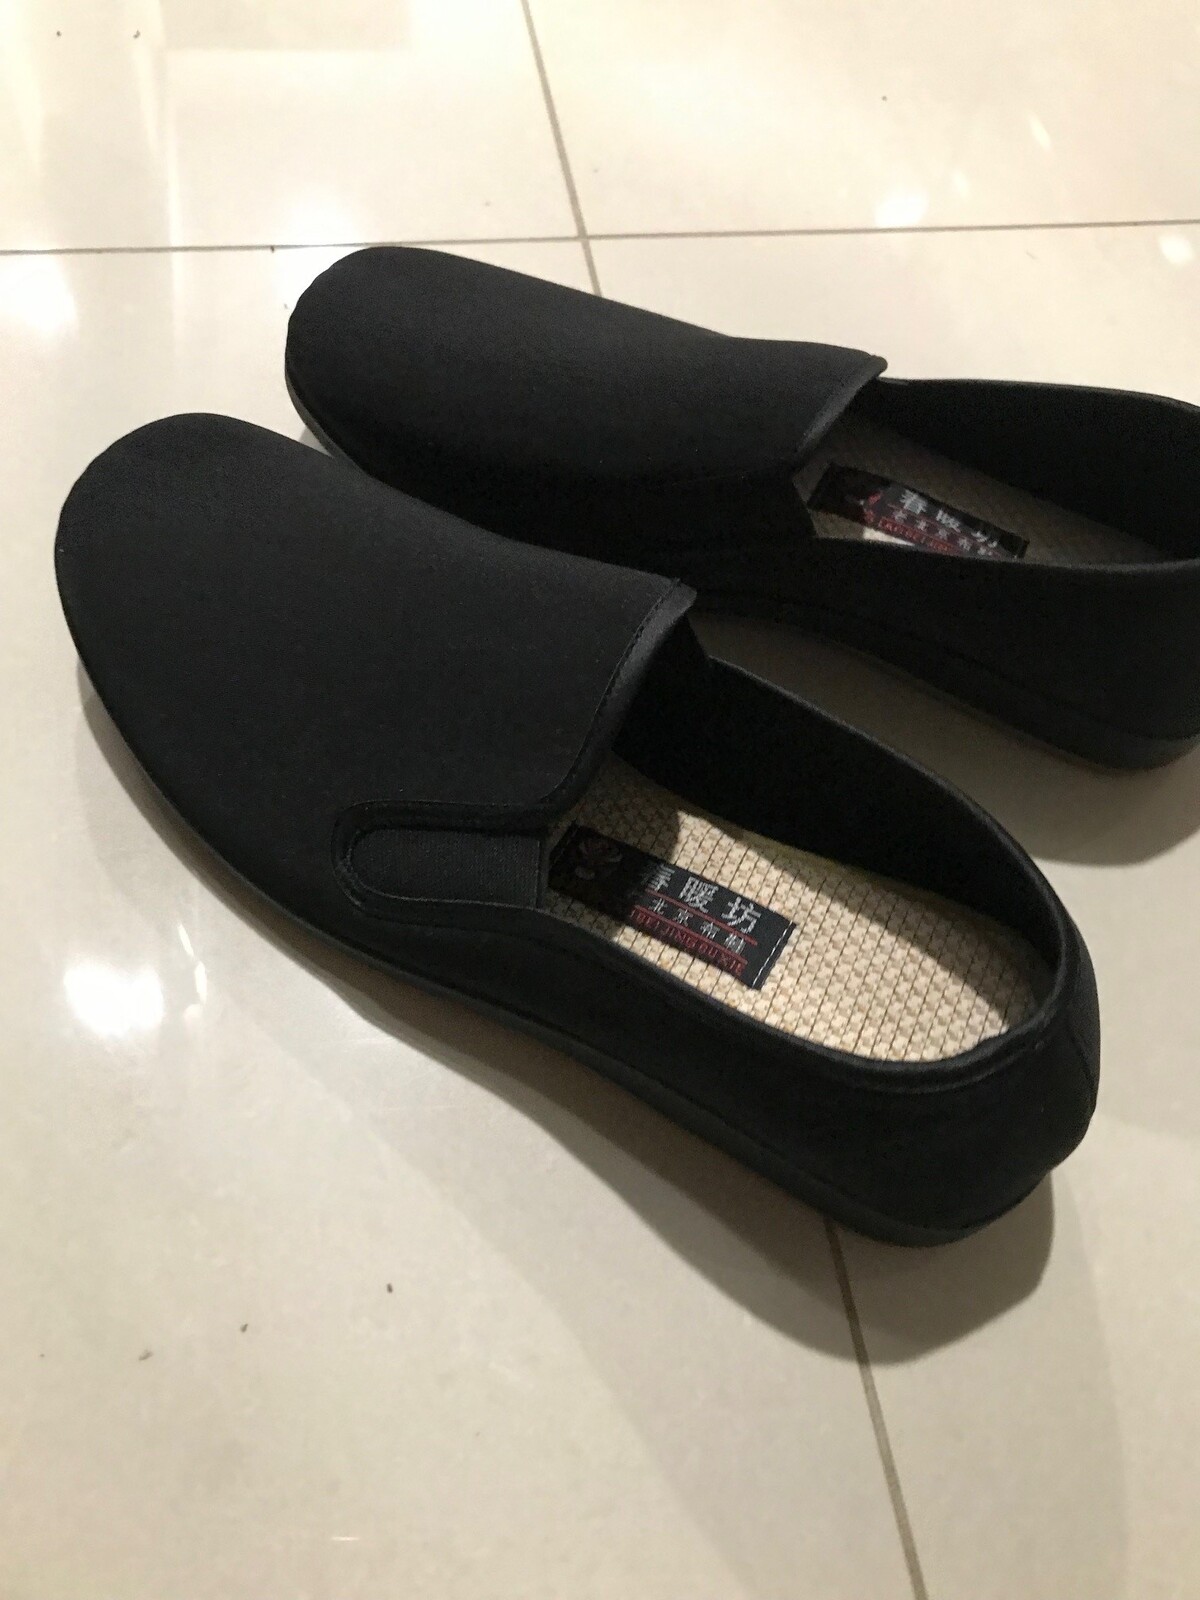 CSG Deluxe Kung Fu Slippers - 46 Europe